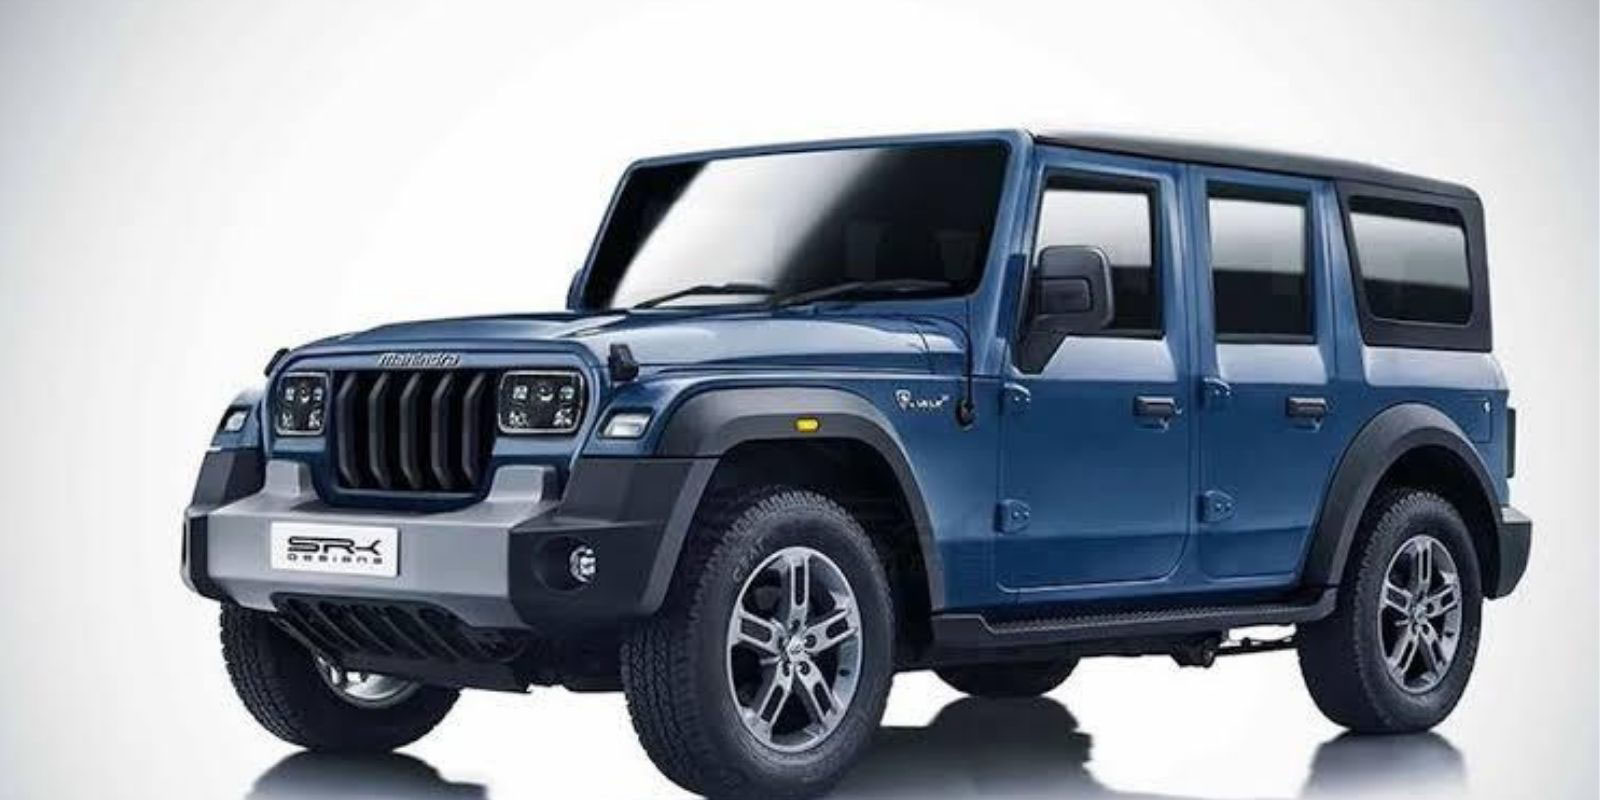 5Door Mahindra Thar Spied On Test Again, Launch Likely In Early 2023